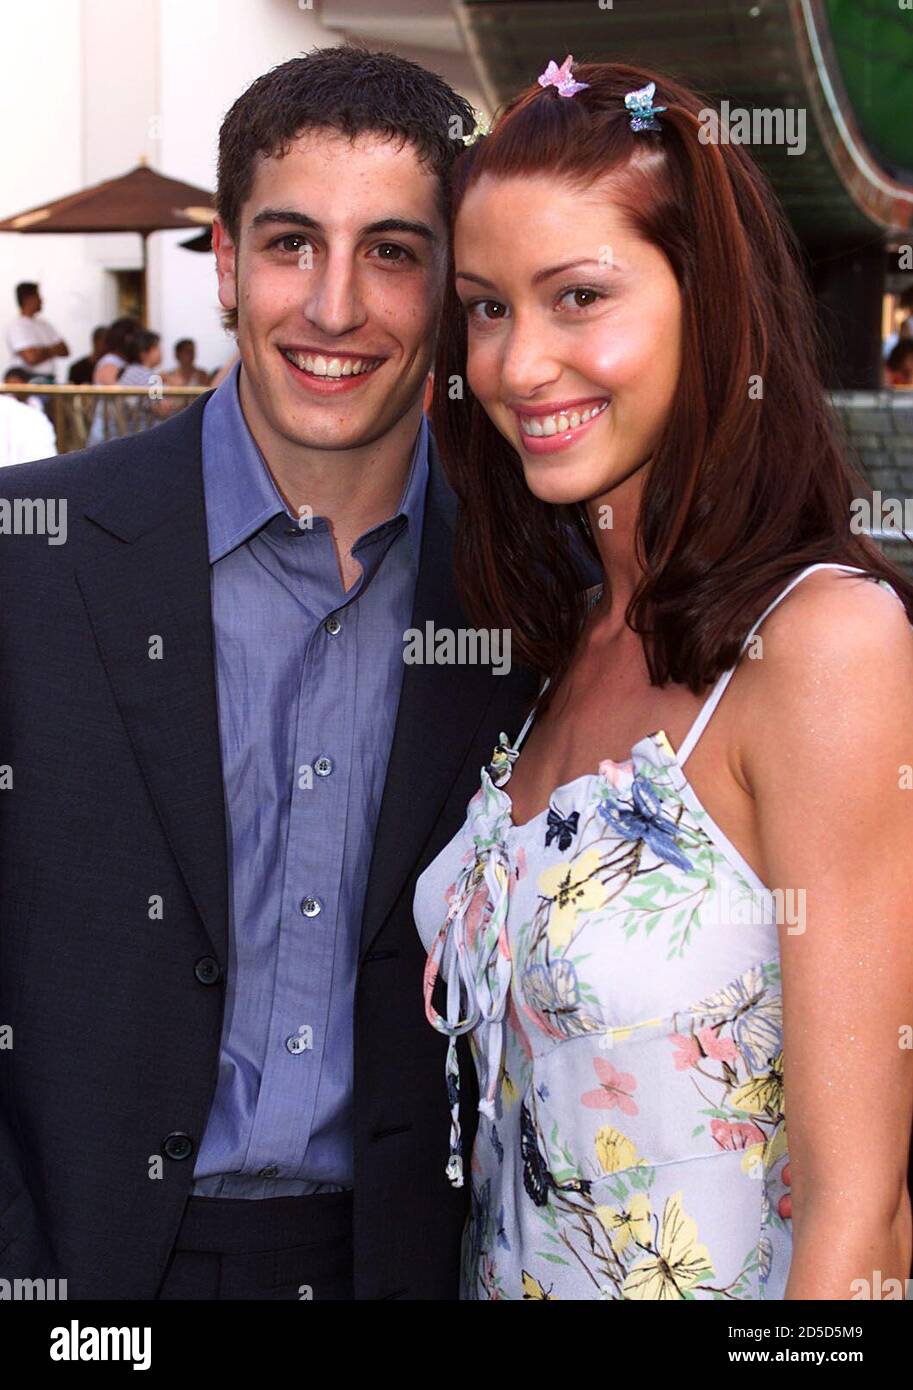 Actors Jason Biggs (L) and Shannon Elizabeth, two of the ensemble cast  members of the comedy film " American Pie" arrive for the film's premiere  July 7 in Los Angeles. The film